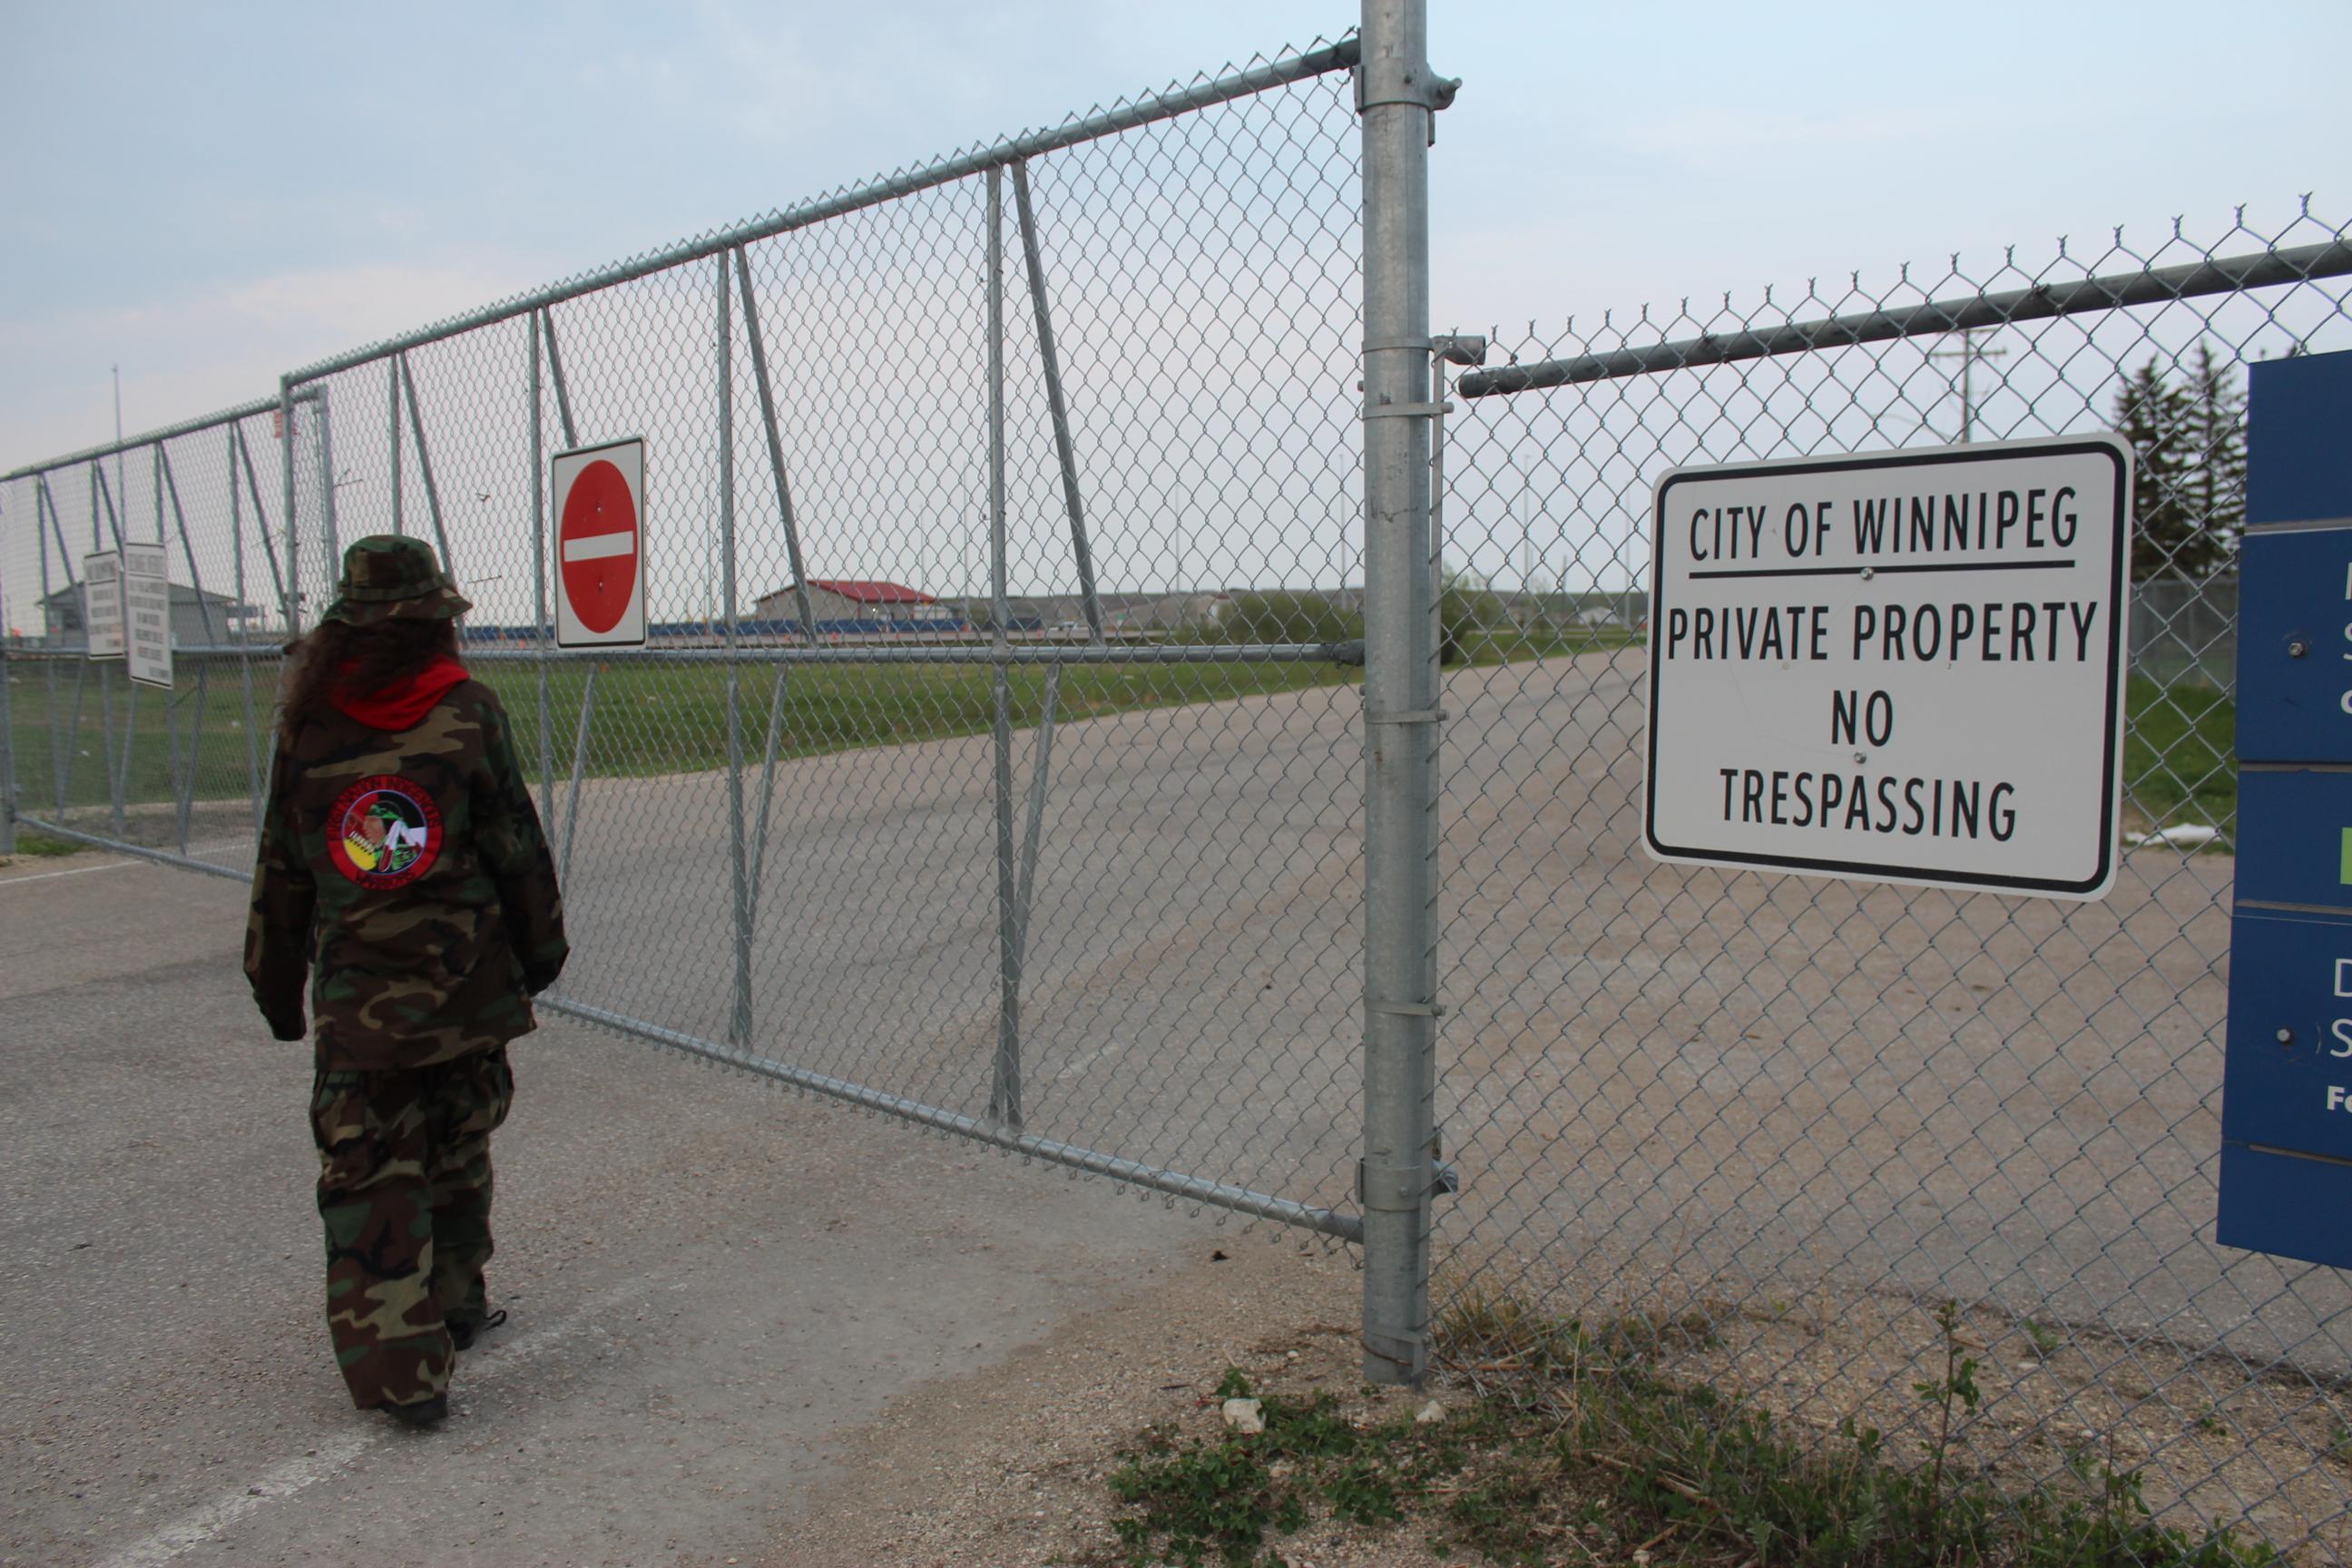 Cambria Harris behind the fence that surrounds the landfill site where her mother is buried in Winnipeg, Canada.